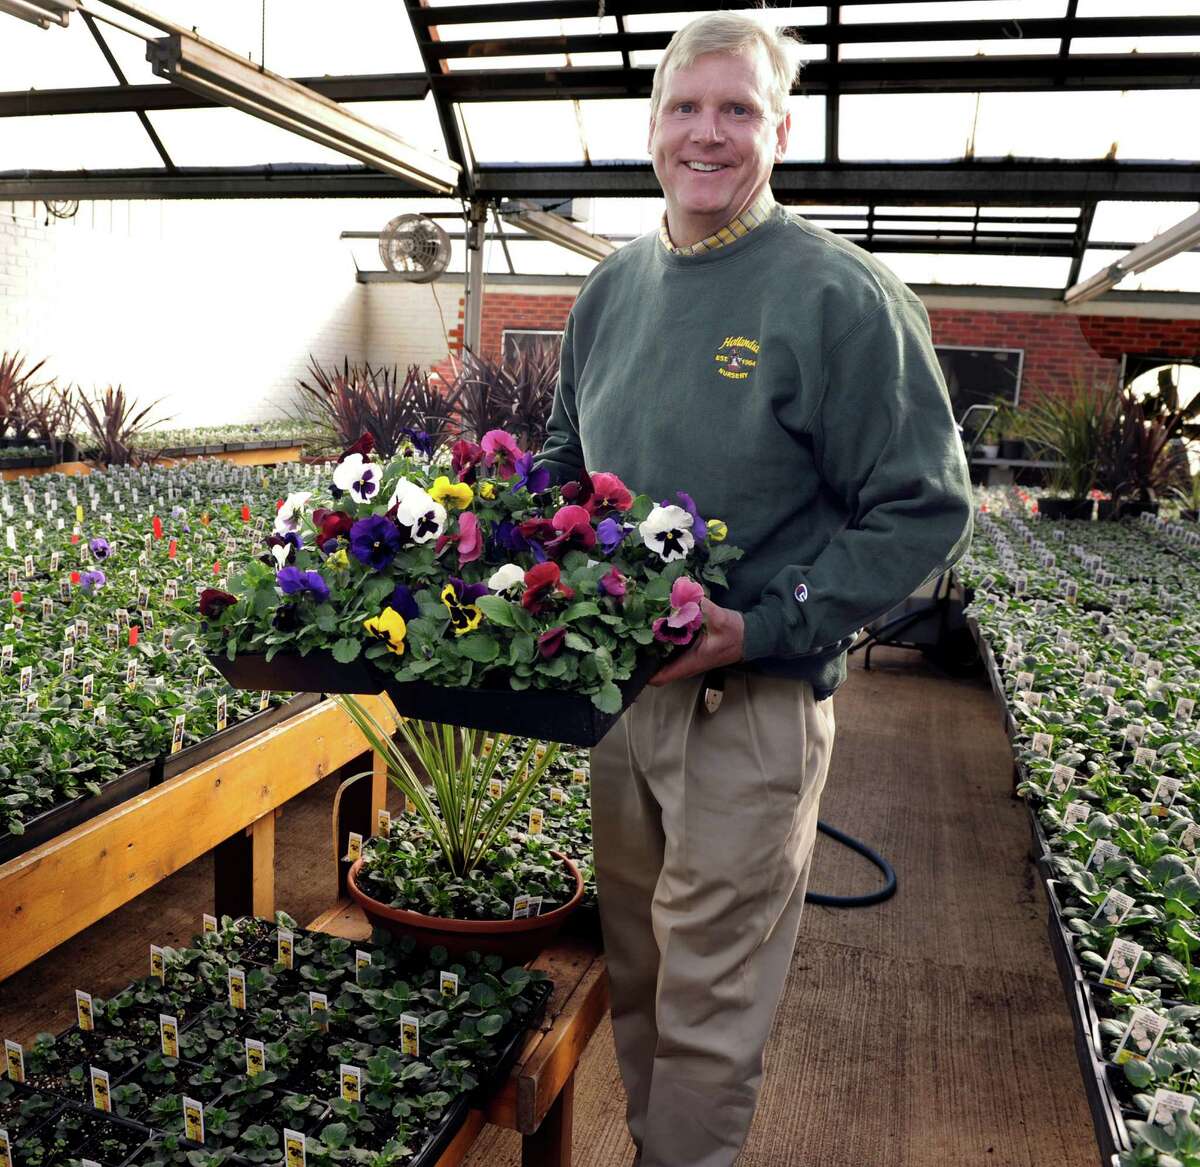 Eugene Reelick owner of Hollandia Nurseries, in Bethel, Conn., holds a tray of petunias in bloom. On either side of him are plants in the early stages of life, Thursday, march 19, 2015.